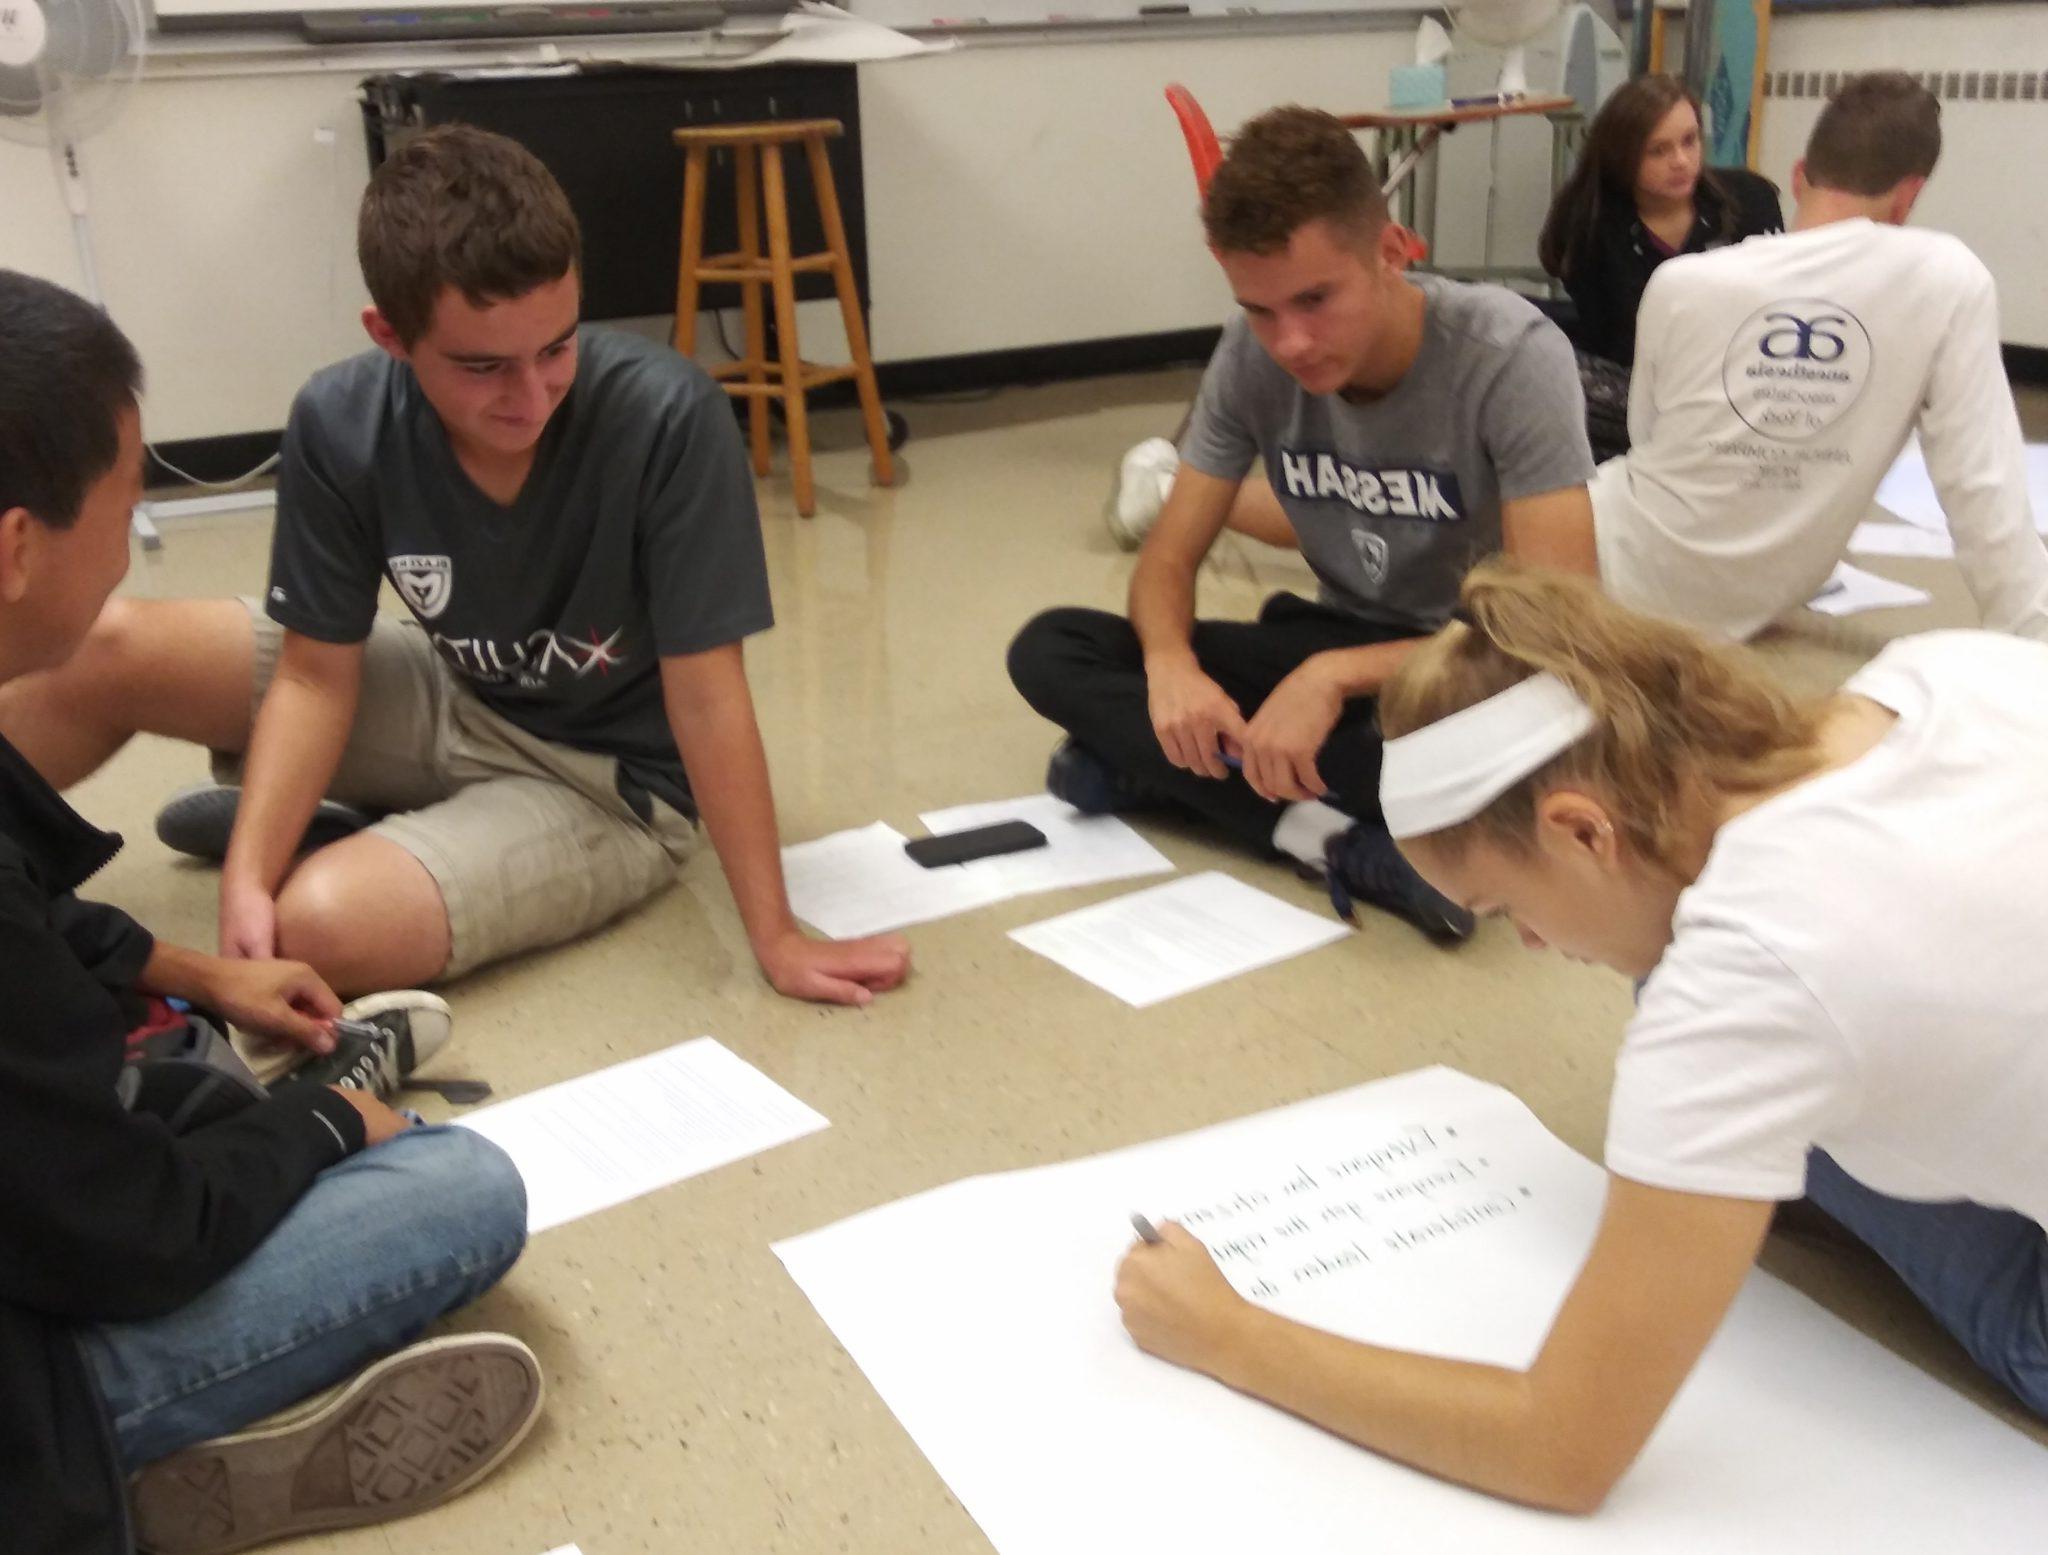 Students collaborating on a class project, drawing on paper on the floor